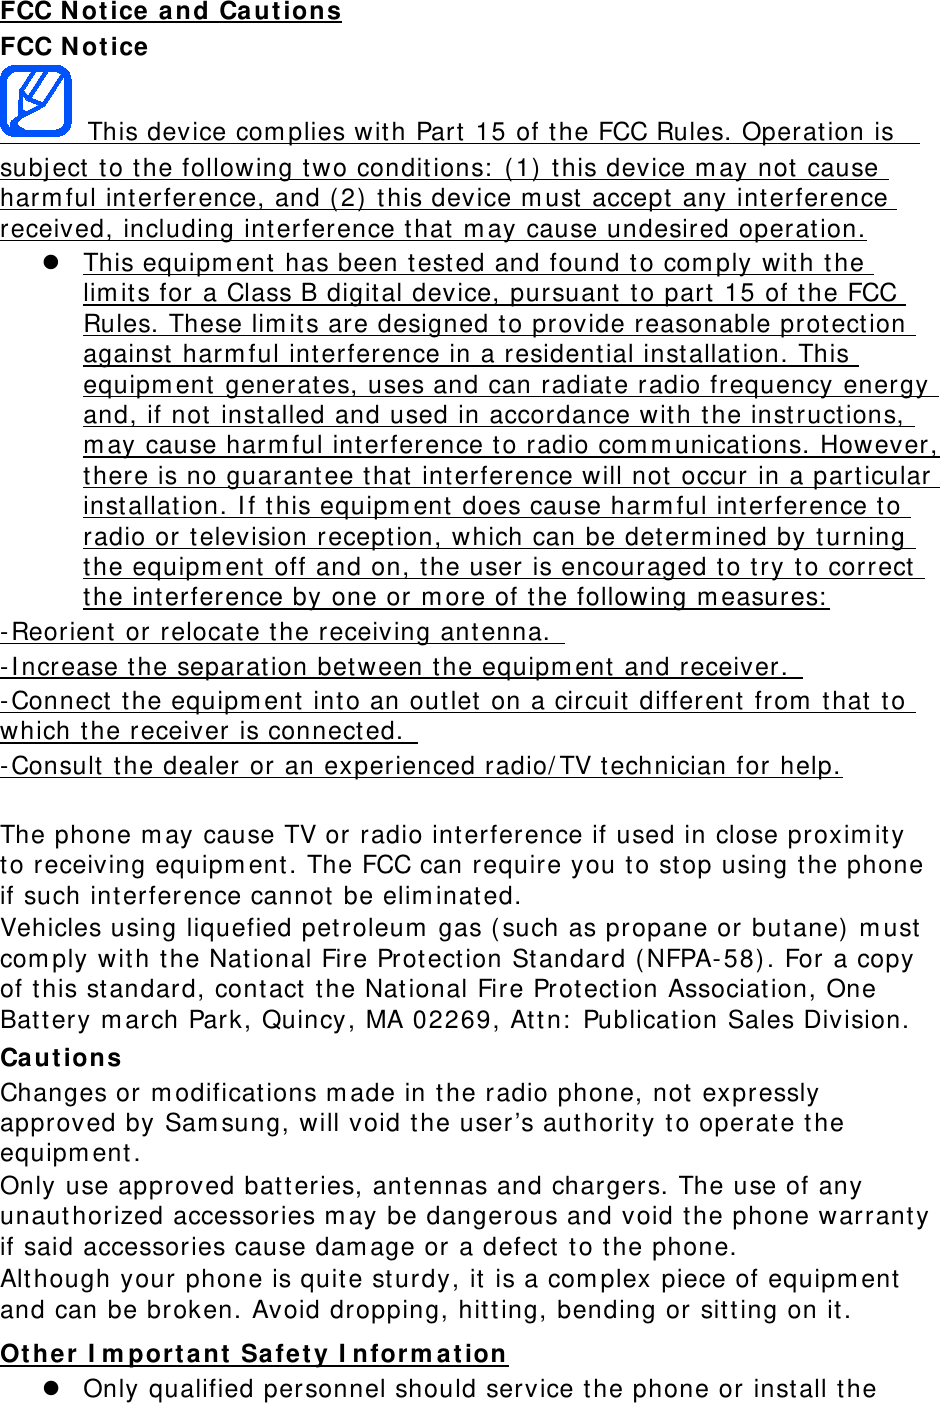 FCC N ot ice a nd Ca ut ions FCC N ot ice   This device com plies wit h Part  15 of the FCC Rules. Oper at ion is  subj ect  to t he following tw o condit ions:  ( 1)  t his device m ay not cause harm ful int erference, and ( 2)  t his device m ust  accept  any interference received, including interference t hat  m ay cause undesired operat ion.  This equipm ent  has been t est ed and found t o com ply wit h t he lim it s for a Class B digit al device, pursuant to part  15 of the FCC Rules. These lim its are designed to provide reasonable protection against  harm ful int erference in a resident ial inst allat ion. This equipm ent  generates, uses and can radiat e radio frequency energy and, if not  inst alled and used in accordance wit h t he inst ruct ions, m ay cause harm ful int erference t o radio com m unicat ions. However, there is no guarant ee that  int erference will not  occur in a part icular inst allat ion. I f t his equipm ent does cause harm ful int erference to radio or television recept ion, which can be determ ined by t urning the equipm ent  off and on, t he user is encouraged t o try t o correct the int erference by one or m ore of t he following m easures:  -Reorient or relocate the receiving antenna.   -I ncrease t he separat ion bet ween the equipm ent and receiver.   -Connect  t he equipm ent int o an out let on a circuit  different  from  t hat  to which the receiver is connected.   -Consult  the dealer or an experienced radio/ TV technician for help.  The phone m ay cause TV or radio interference if used in close proxim ity  to receiving equipm ent . The FCC can require you to stop using t he phone if such inter ference cannot  be elim inat ed. Vehicles using liquefied petroleum  gas ( such as propane or but ane)  m ust com ply with t he Nat ional Fire Prot ect ion St andard (NFPA-58). For a copy of this st andard, cont act  the Nat ional Fir e Protection Association, One Bat t ery m arch Park, Quincy , MA 02269, At t n:  Publicat ion Sales Division. Ca ut ions Changes or m odificat ions m ade in the r adio phone, not  expressly approved by Sam sung, w ill void the user’s aut horit y to operat e t he equipm ent .  Only use approved bat teries, ant ennas and chargers. The use of any unaut horized accessories m ay be dangerous and void t he phone warrant y if said accessories cause dam age or a defect  t o the phone. Alt hough your phone is quite st urdy, it  is a com plex piece of equipm ent  and can be broken. Avoid dropping, hit t ing, bending or sit t ing on it . Ot her I m port ant  Safet y I nfor m at ion  Only qualified personnel should service t he phone or inst all t he 